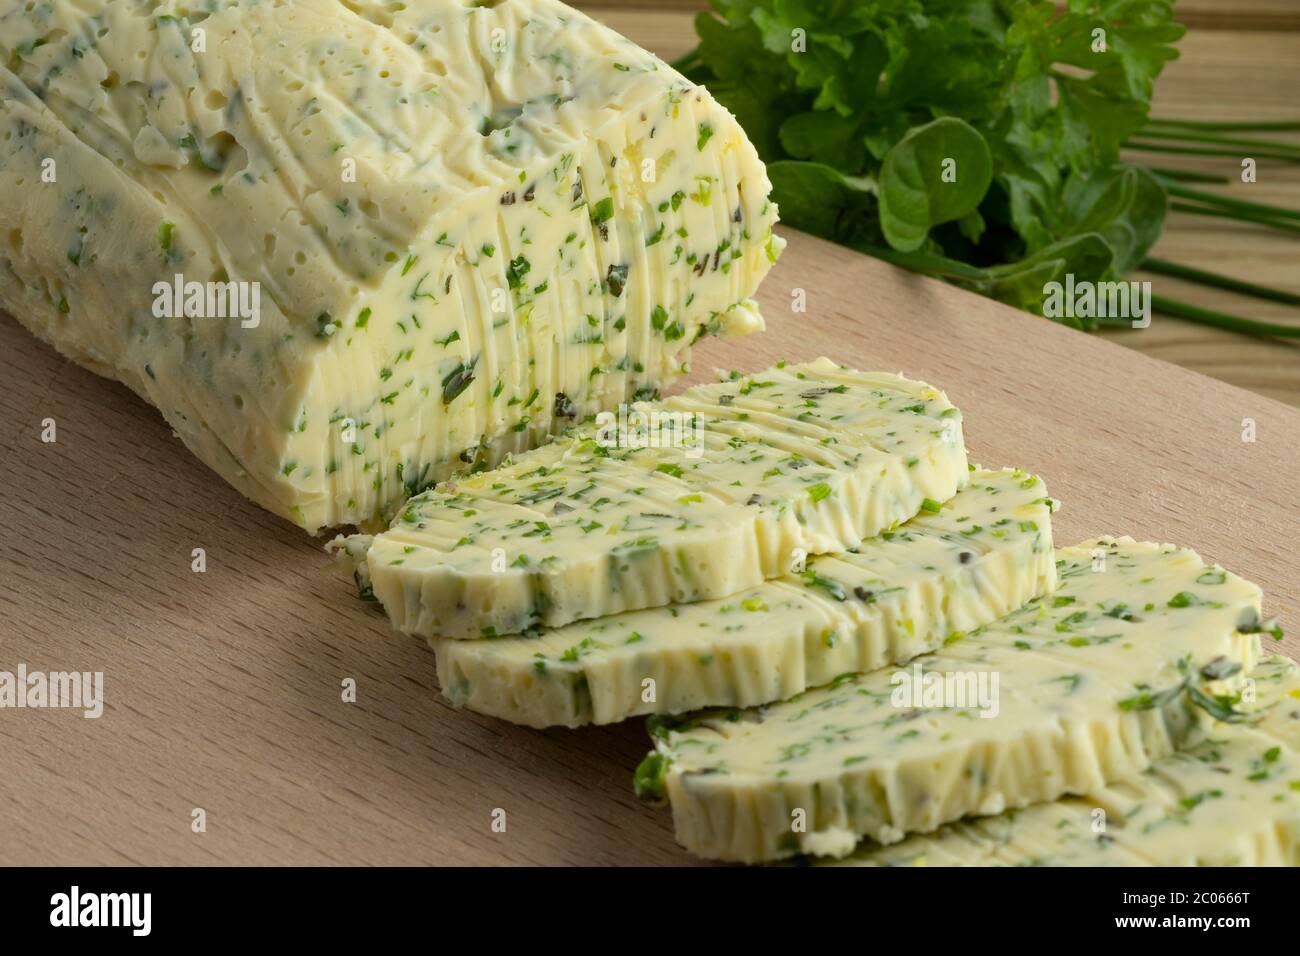 Cutting board with fresh made herb butter close up Stock Photo